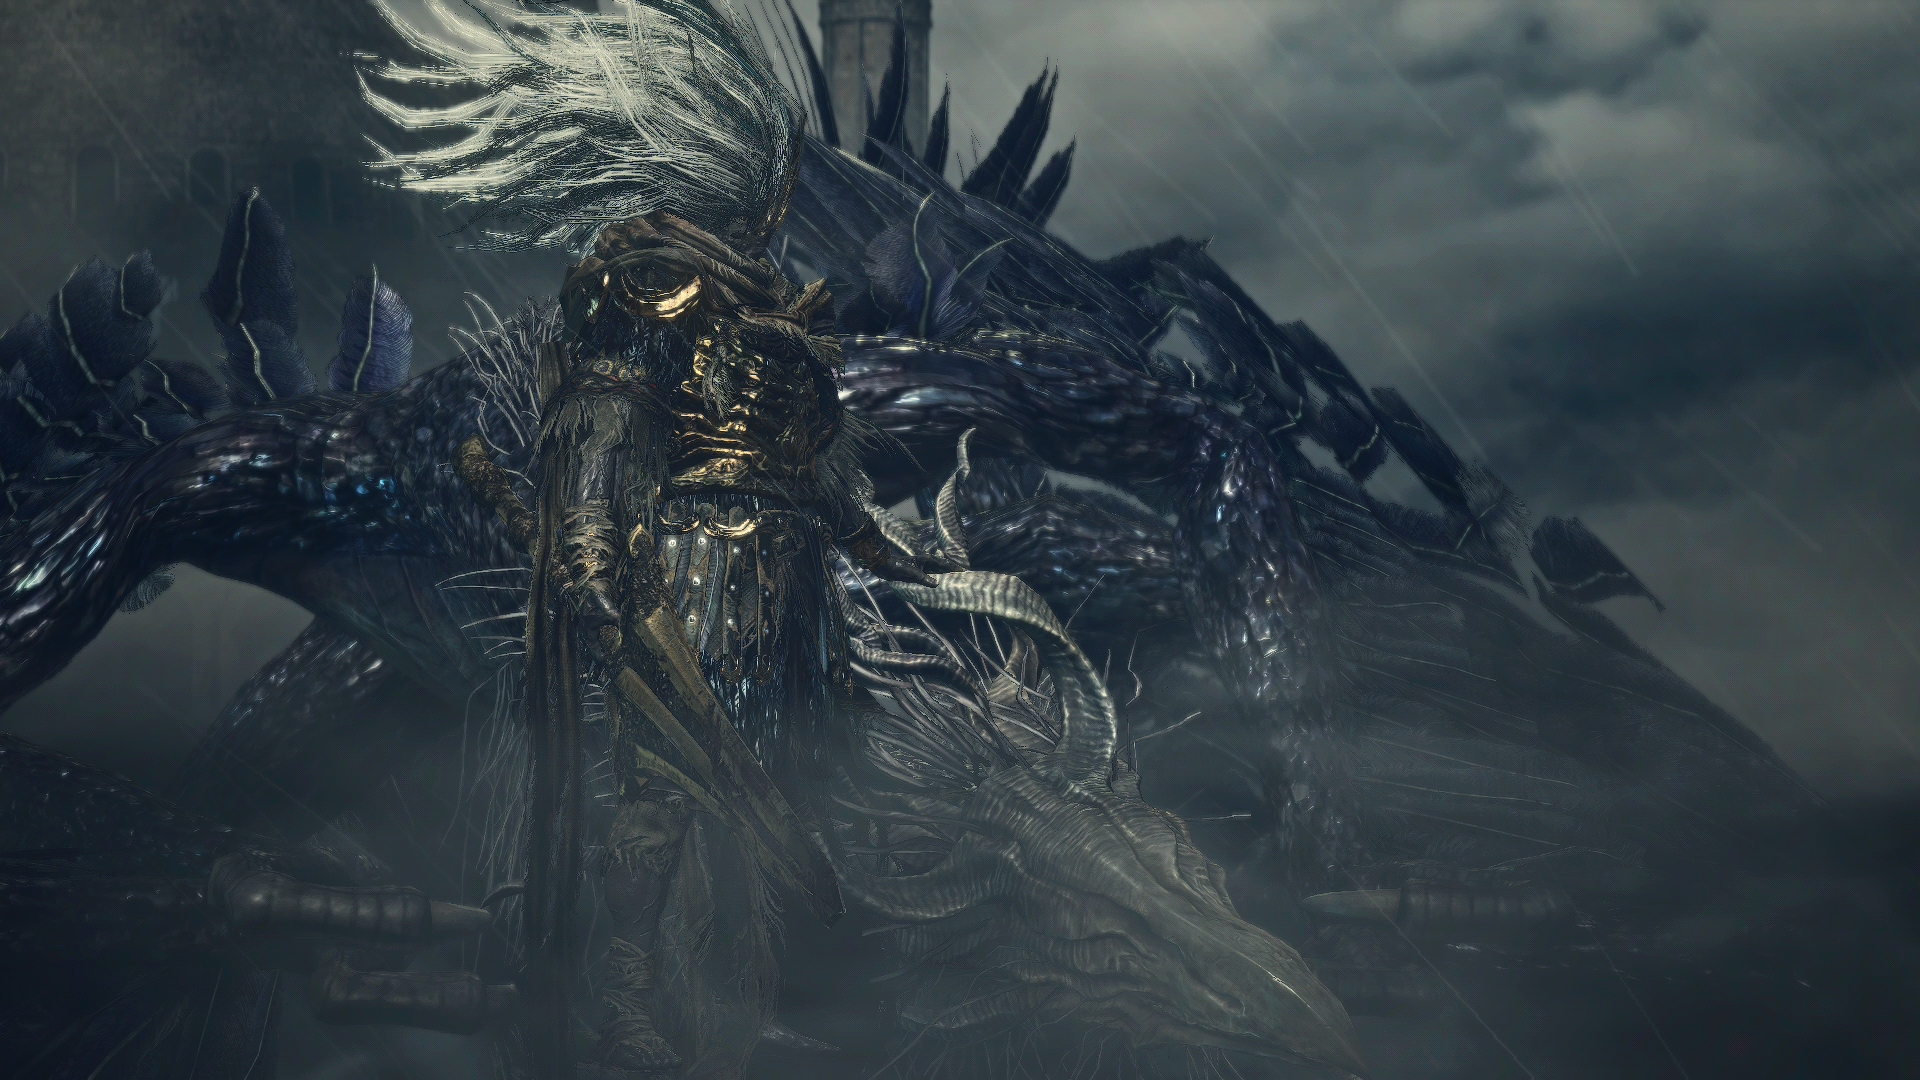 General 1920x1080 Dark Souls III Dark Souls From Software armor video games weapon video game art screen shot video game characters CGI standing rain mist clouds Nameless King